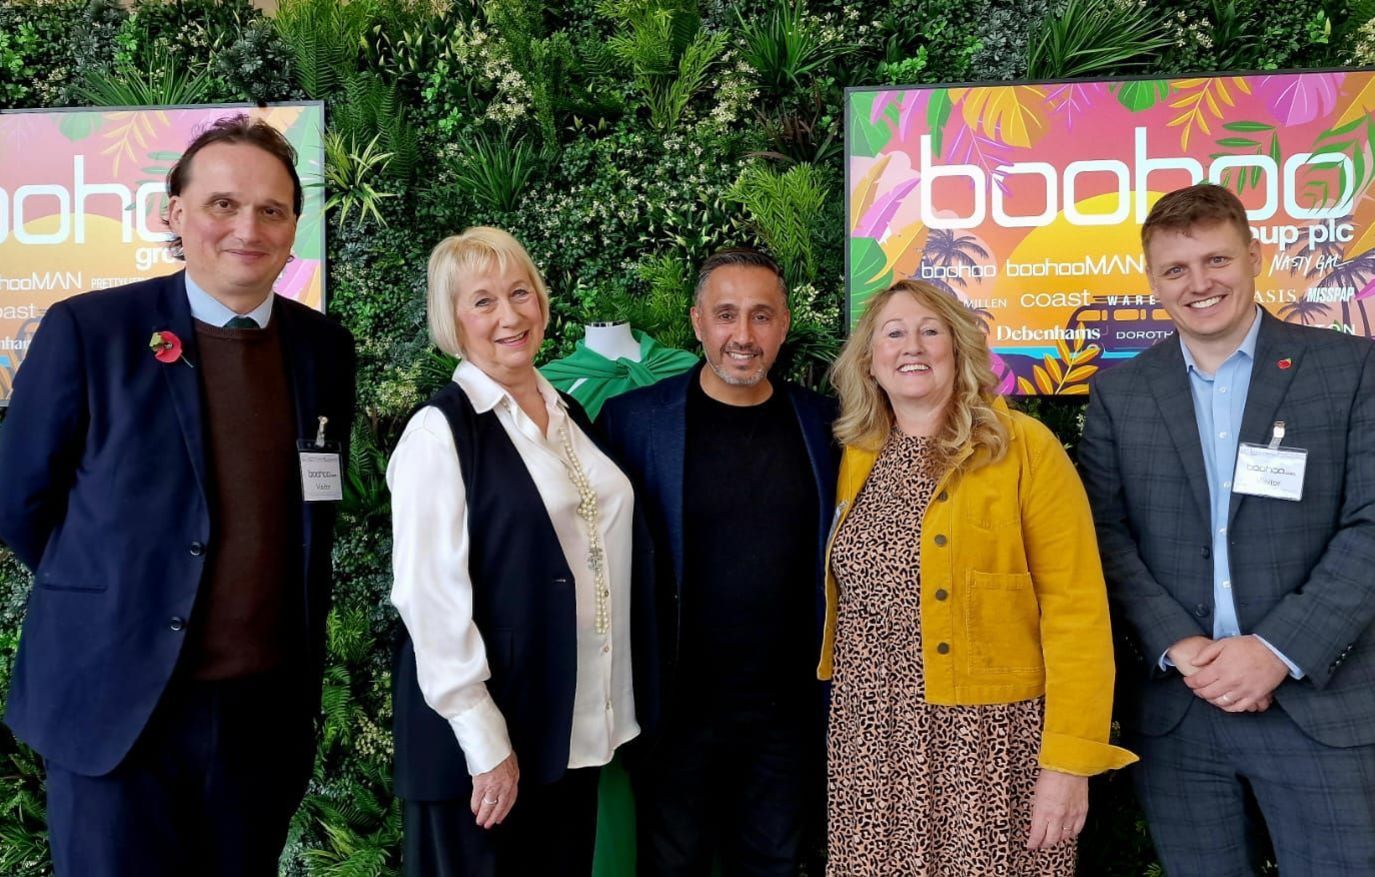 ATMF chair, Sajjad Khan, attending a panel discussion about diversity of manufacturing in Leicestershire at Boohoo Group PLC.